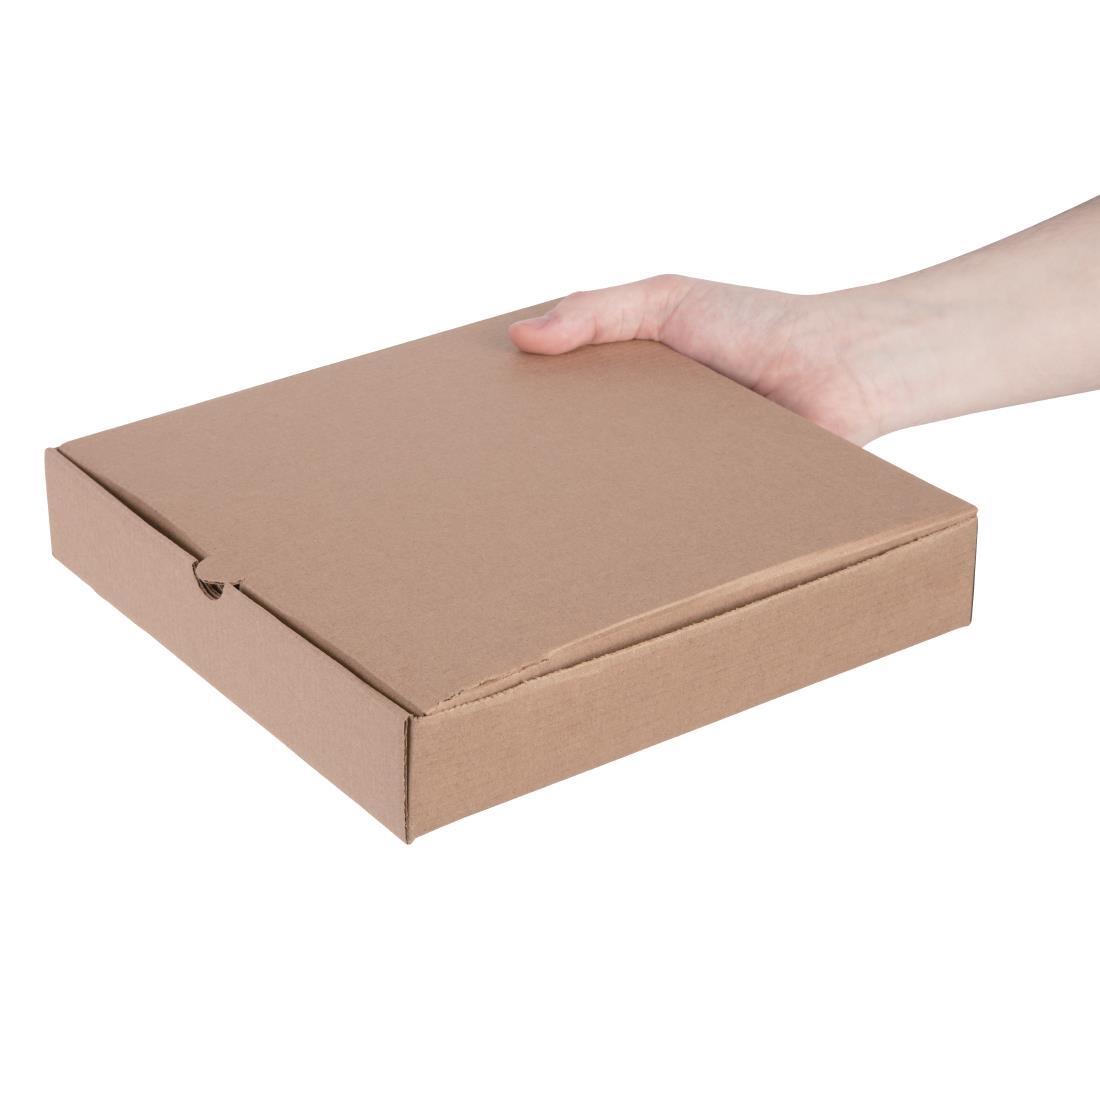 Fiesta Compostable Plain Pizza Boxes 9" (Pack of 100) - DC723  - 3